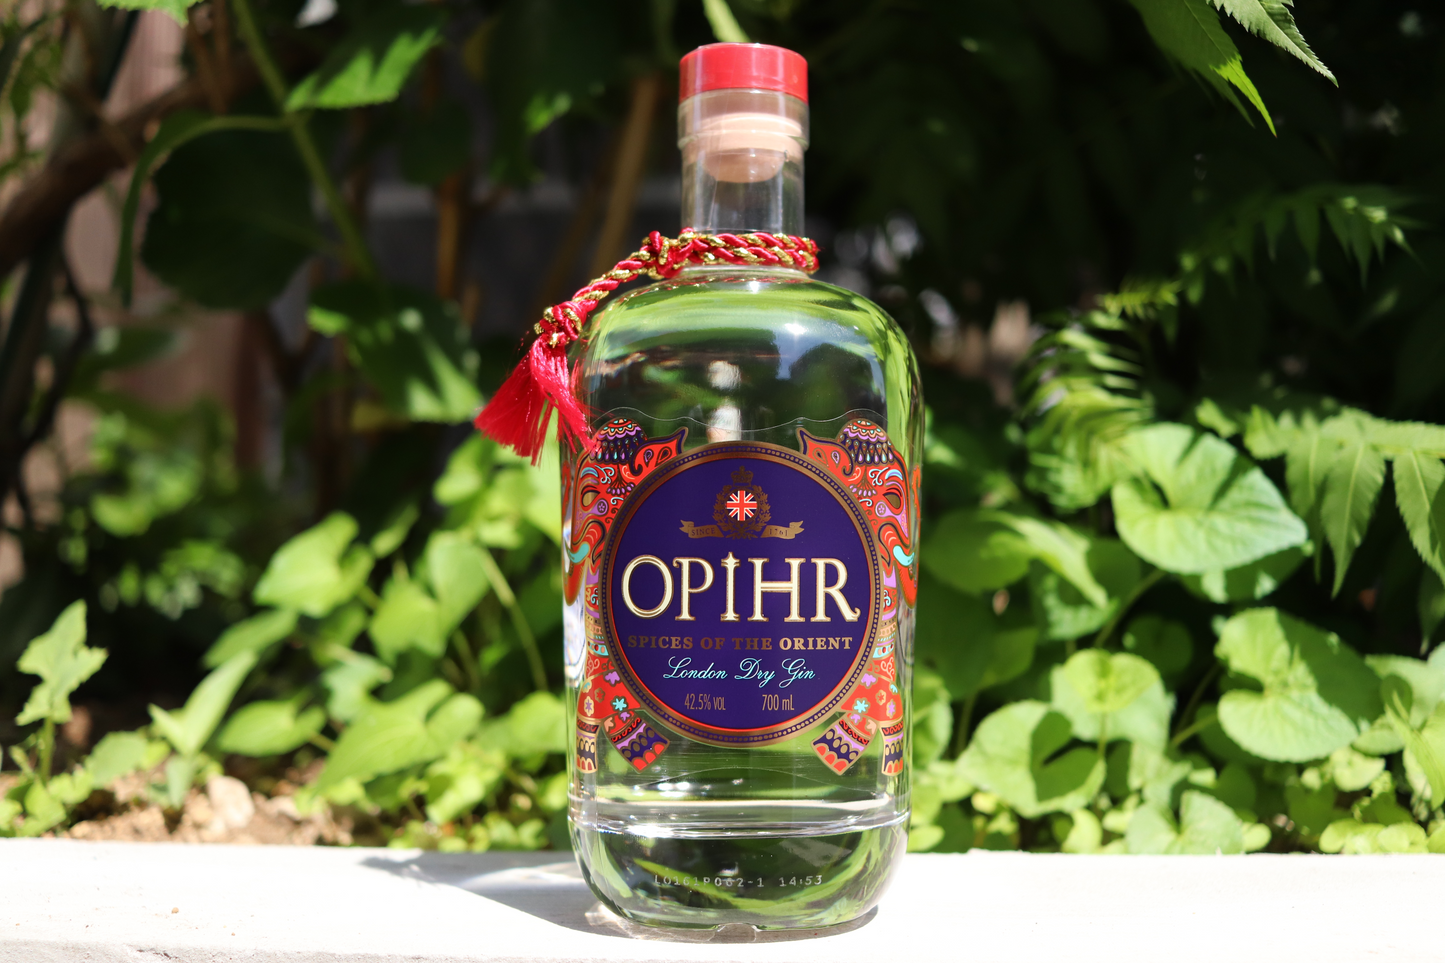 OPIHR Spices of the Orient London Dry Gin